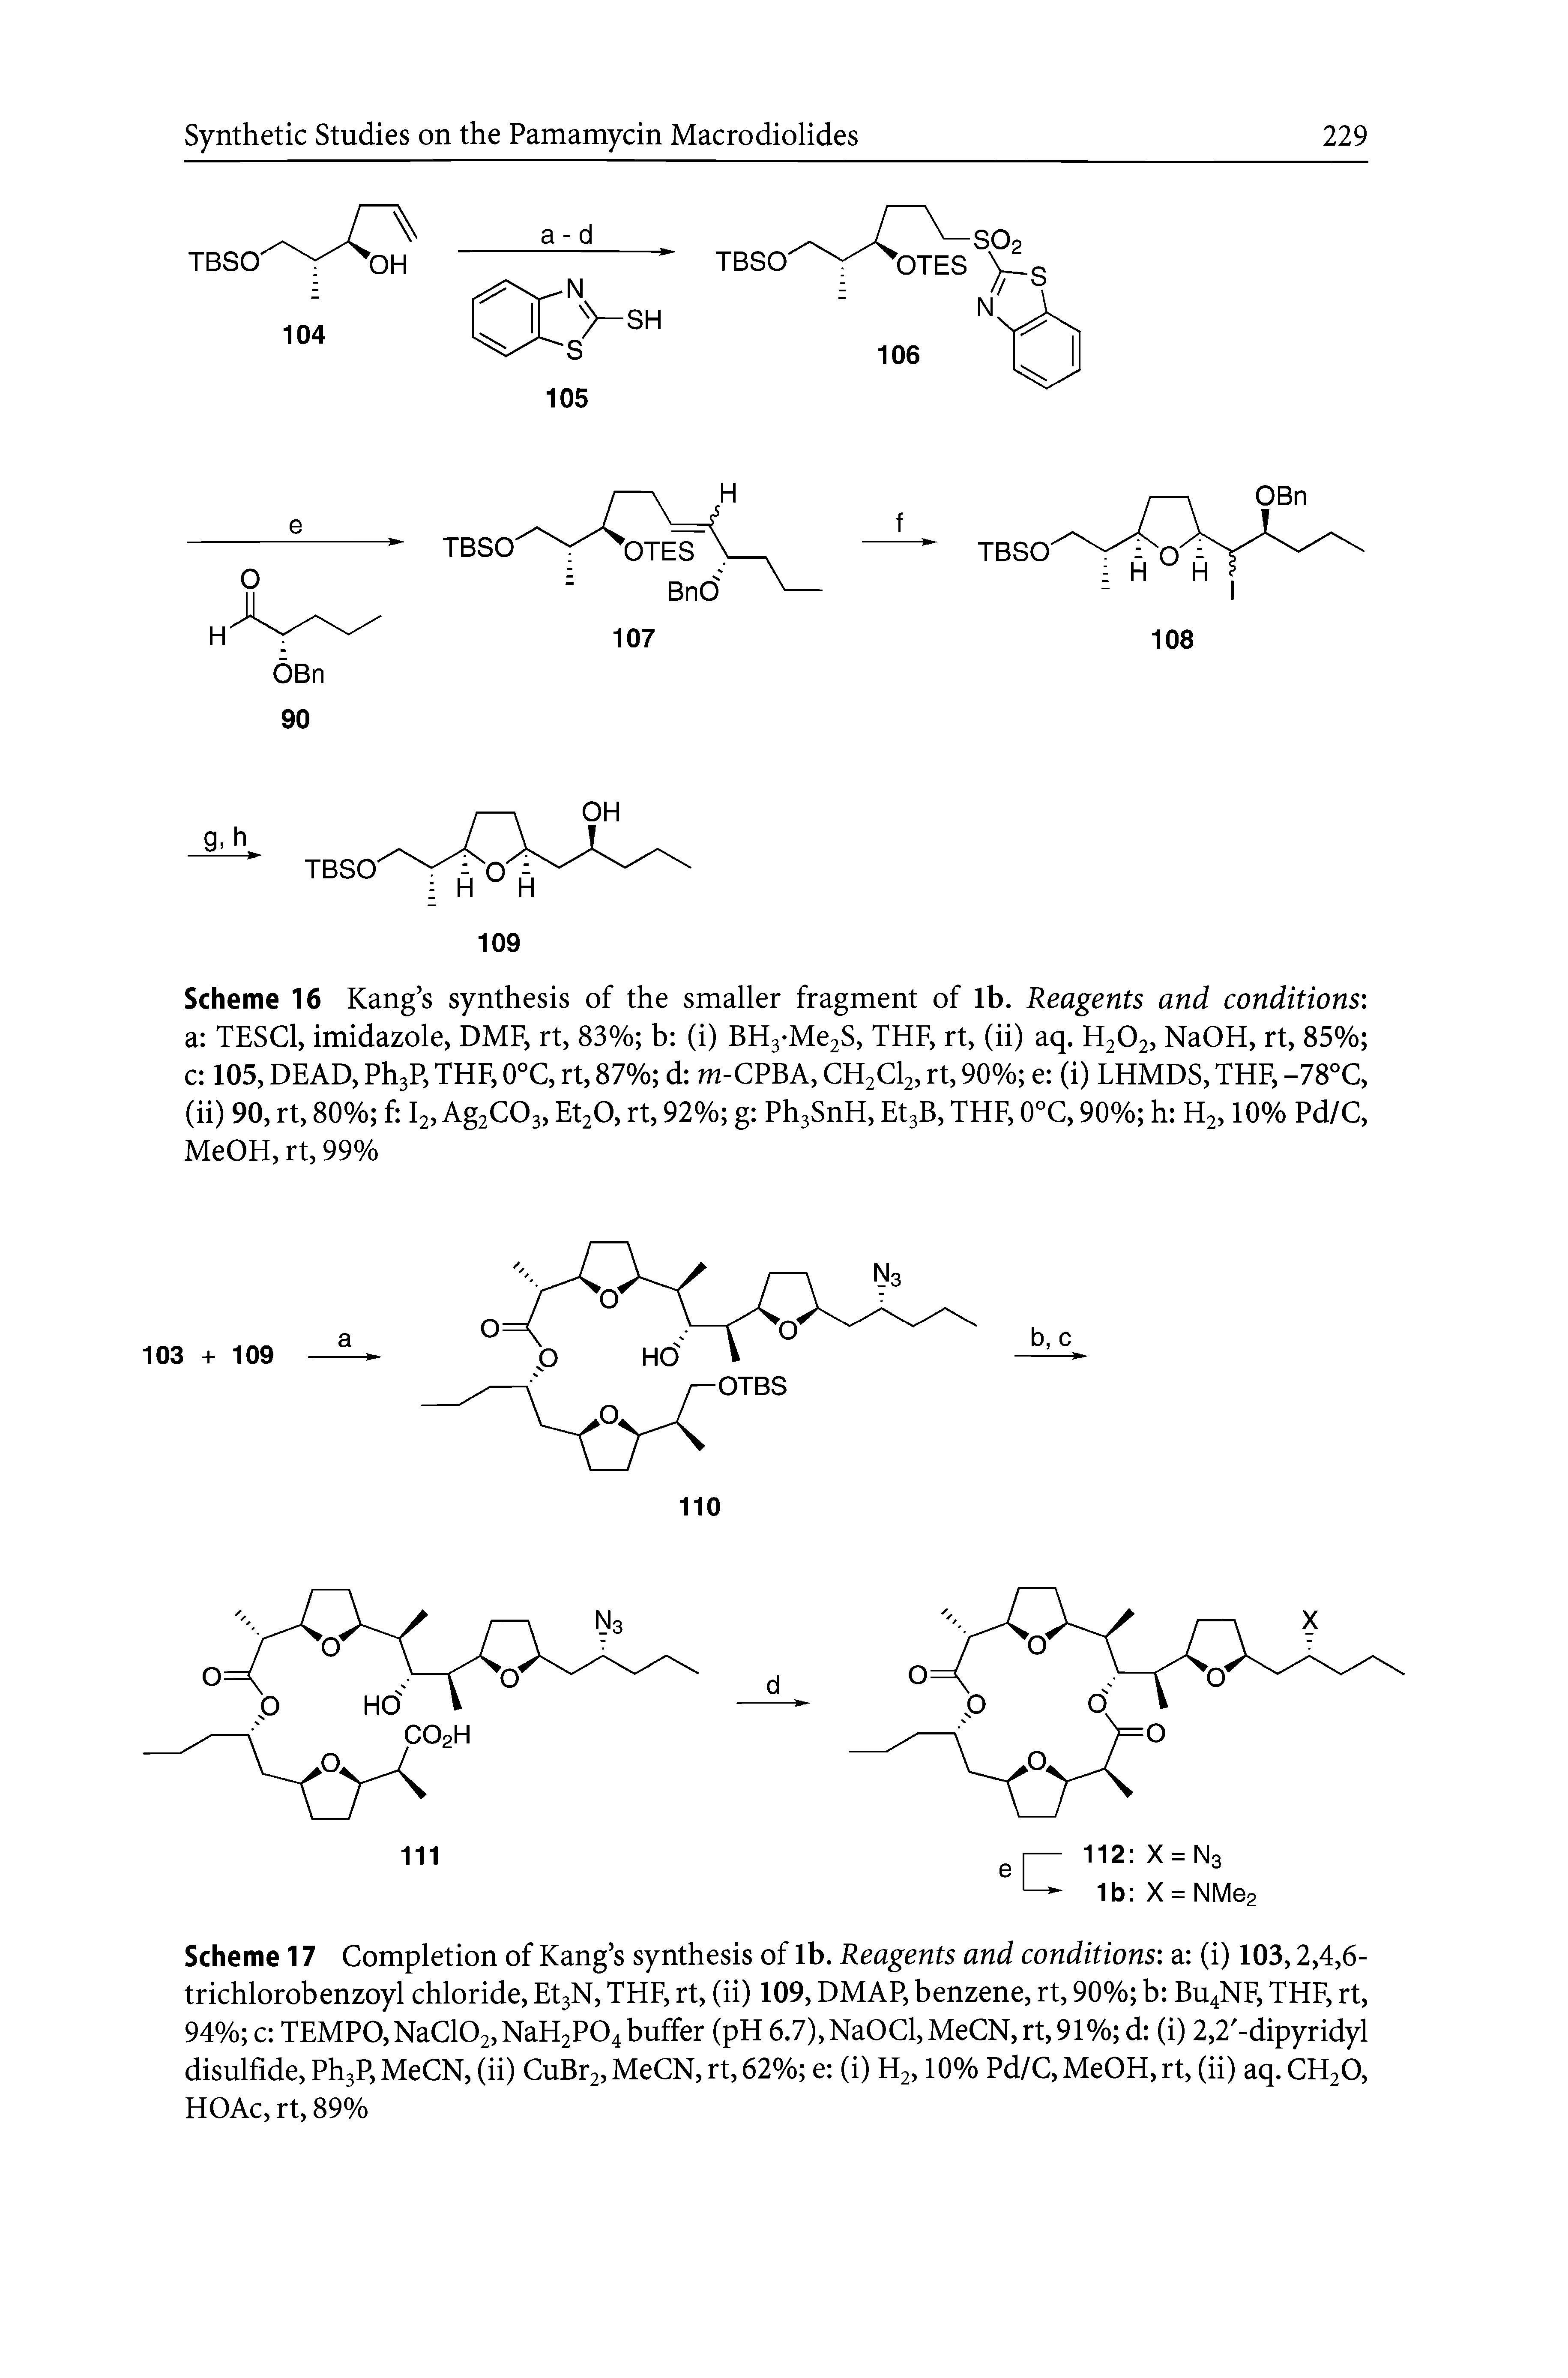 Scheme 17 Completion of Kang s synthesis of lb. Reagents and conditions a (i) 103,2,4,6-trichlorobenzoyl chloride, Et3N, THF, rt, (ii) 109, DMAP, benzene, rt, 90% b BU4NF, THF, rt, 94% c TEMPO, NaCl02, NaH2P04 buffer (pH 6.7),NaOCl,MeCN,rt,91% d (i) 2,2 -dipyridyl disulfide, Ph3P, MeCN, (ii) CuBr2, MeCN, rt, 62% e (i) H2,10% Pd/C, MeOH, rt, (ii) aq. CH2O, HOAc, rt, 89%...